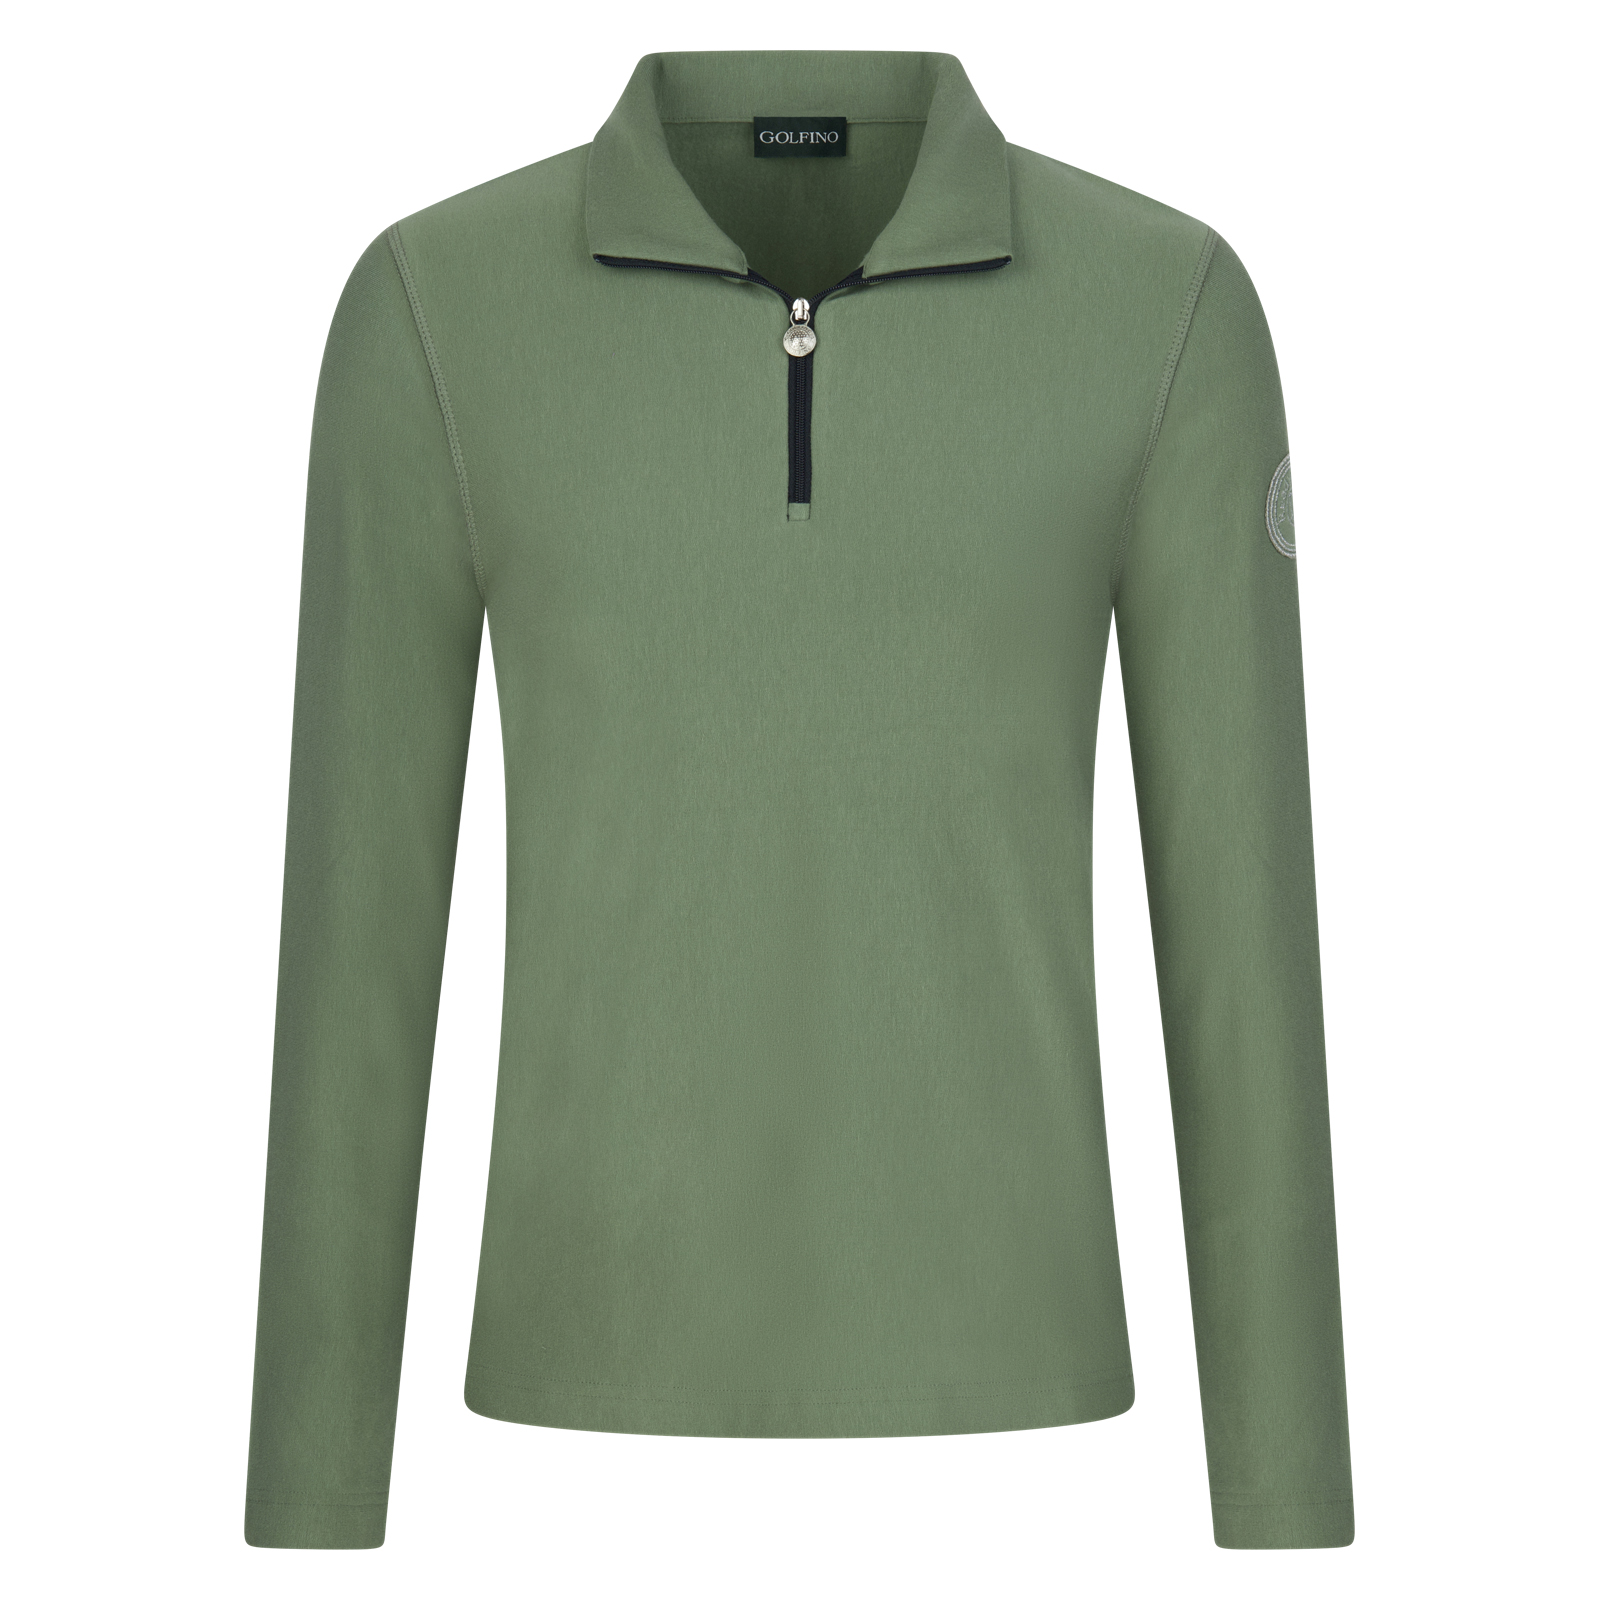 Ladies' warm golf troyer made from sustainable Techno Wool